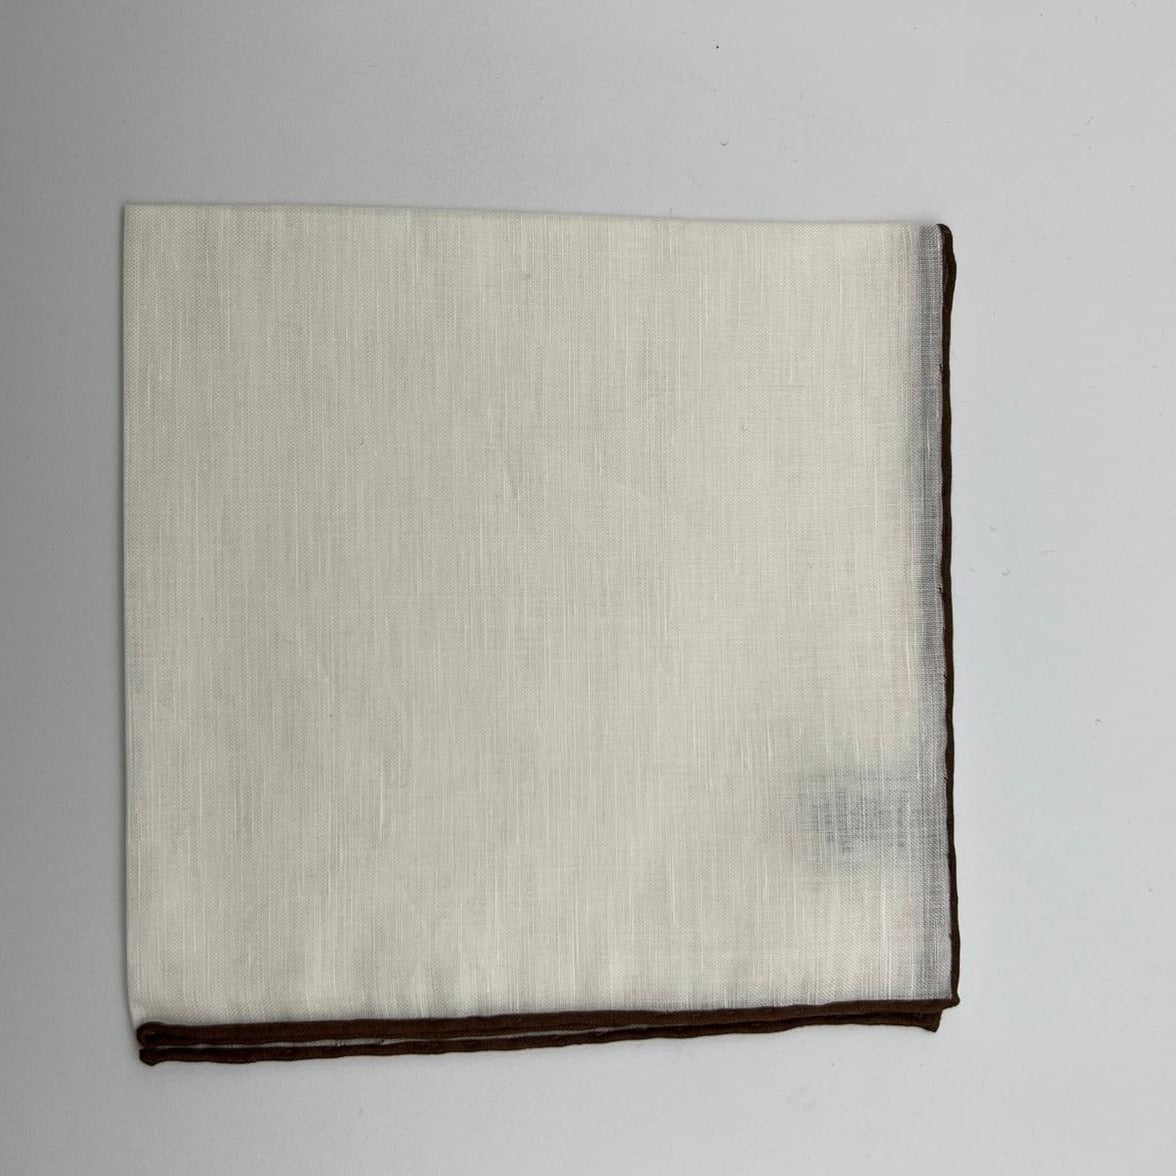 Cruciani & Bella 60%Linen 40% Cotton Hand-rolled  -  Pocket Square White and Brown Handmade in Italy 33 cm X 33 cm #7511